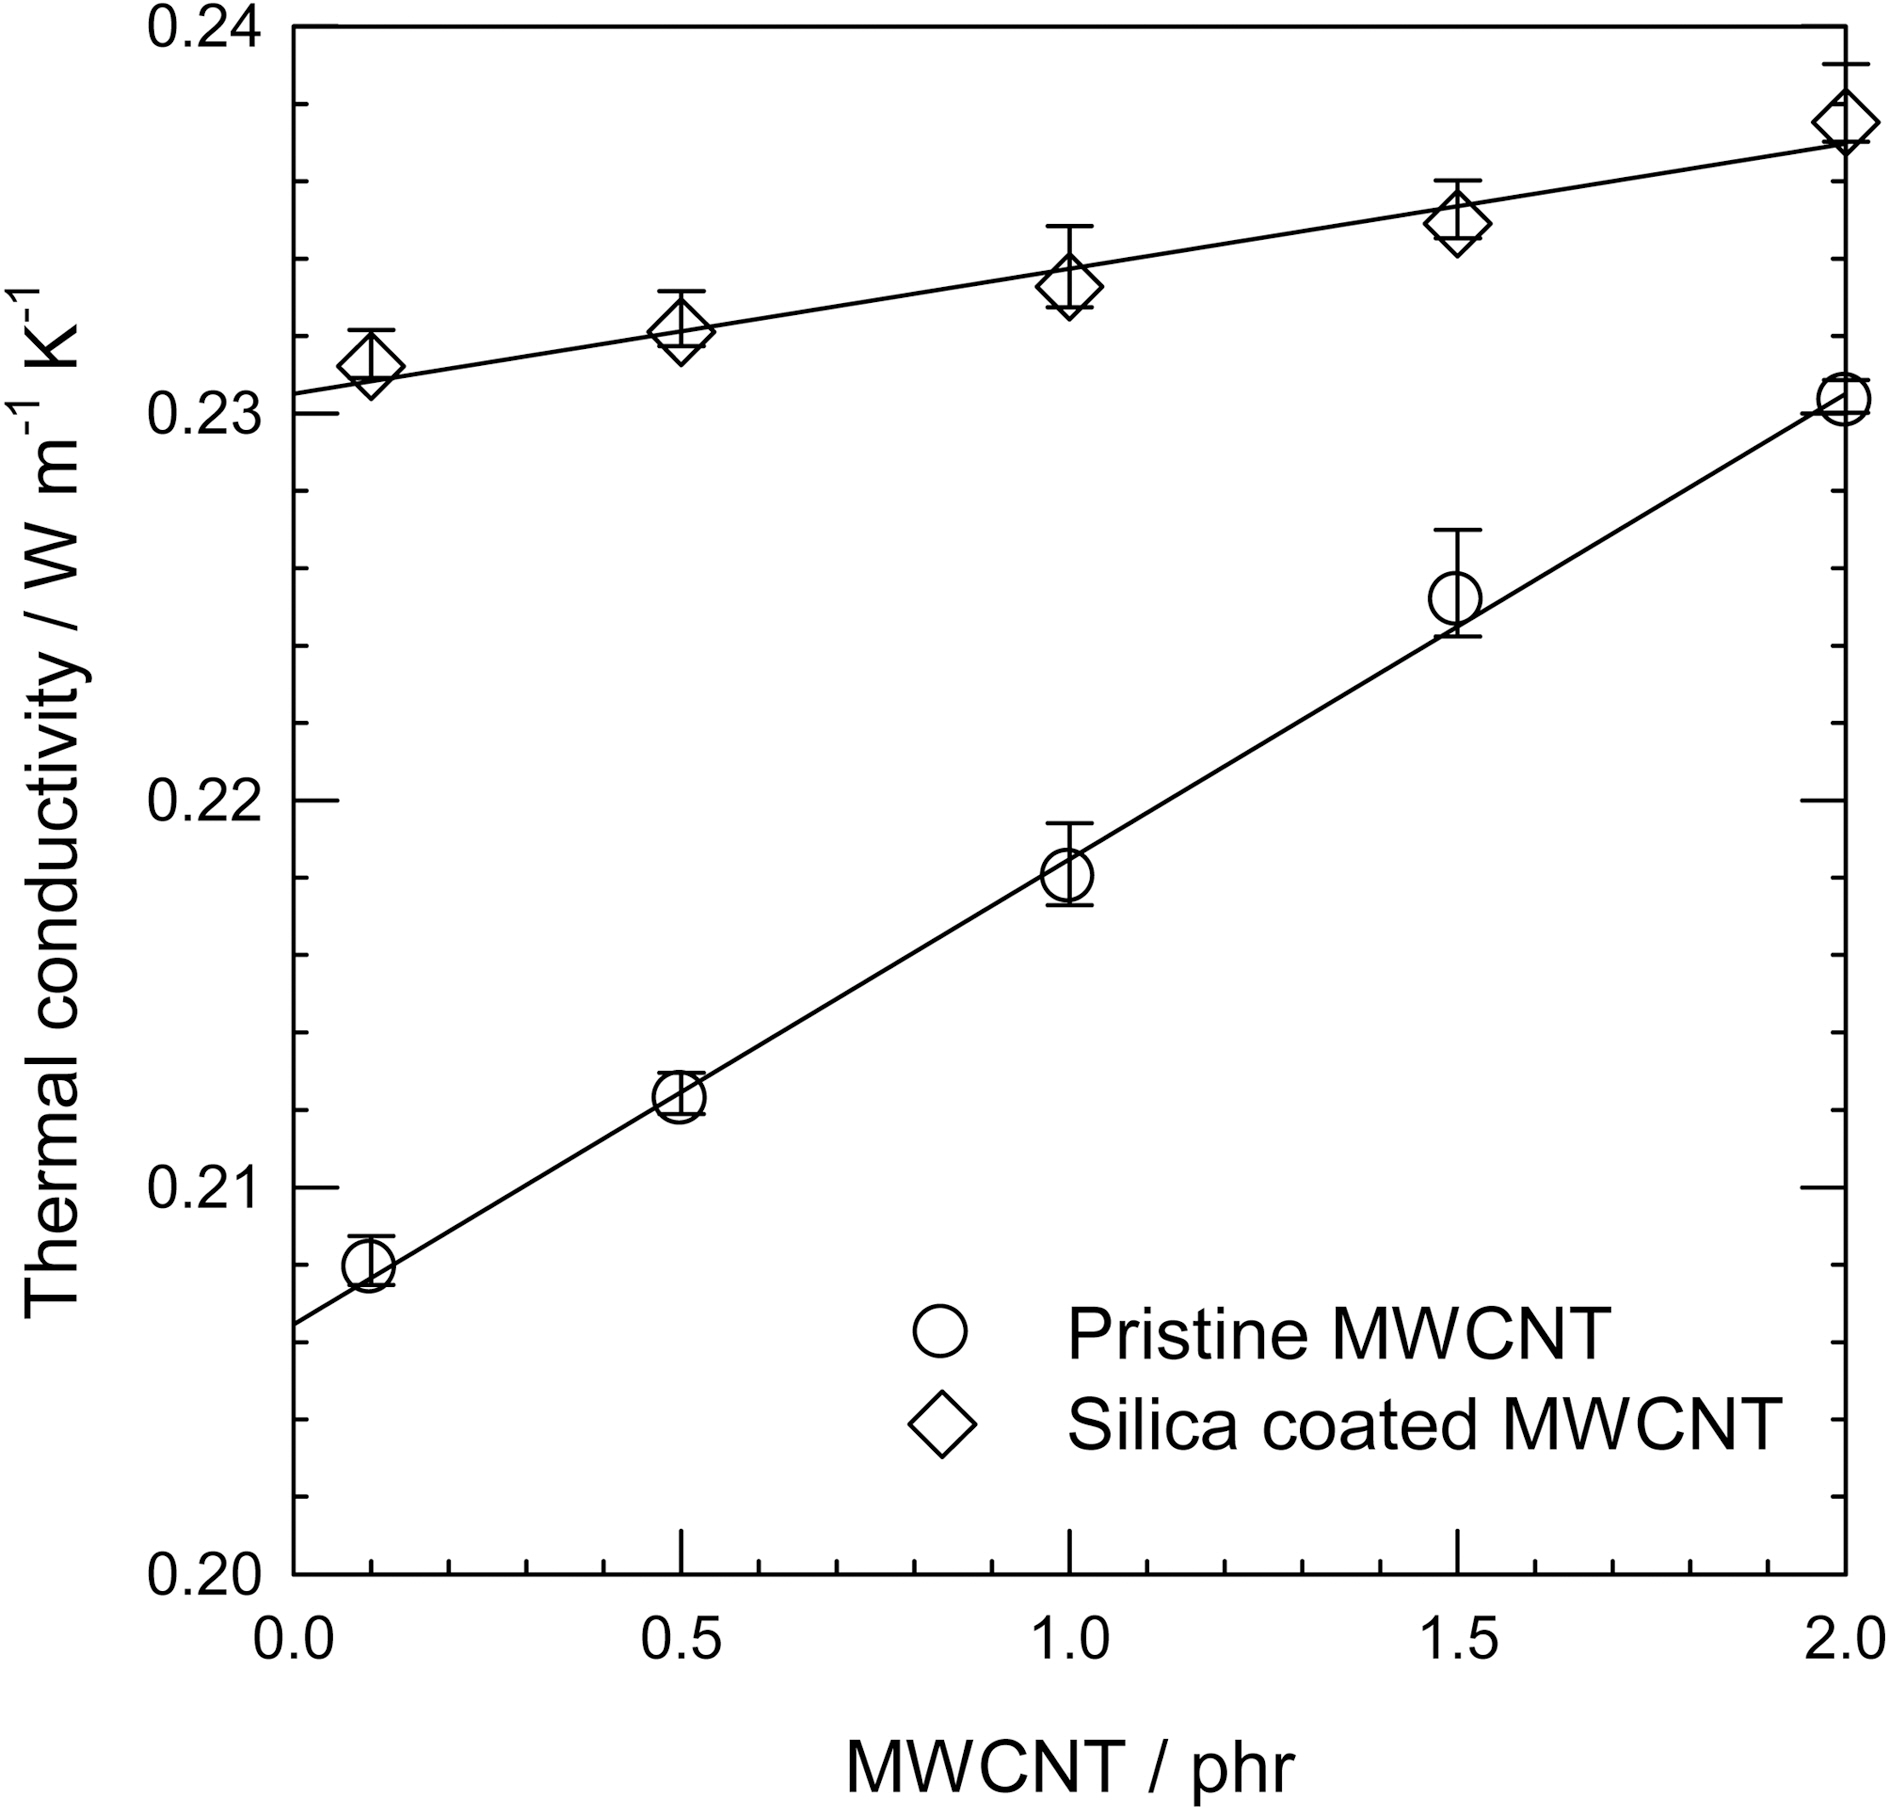 Thermal conductivity of raw MWCNT and silica-coated MWCNT incorporated PDMS nanocomposites [38].